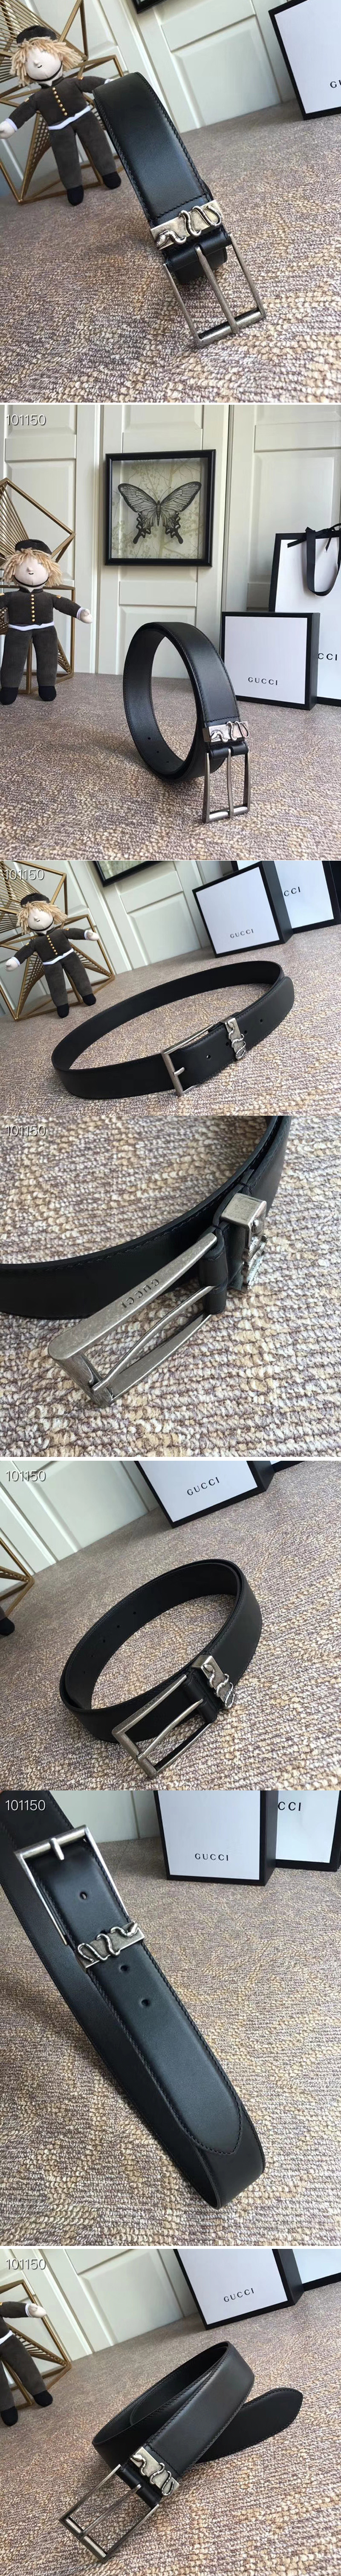 Replica Gucci 474811 4cm Leather belt Silver snake buckle in Black leather